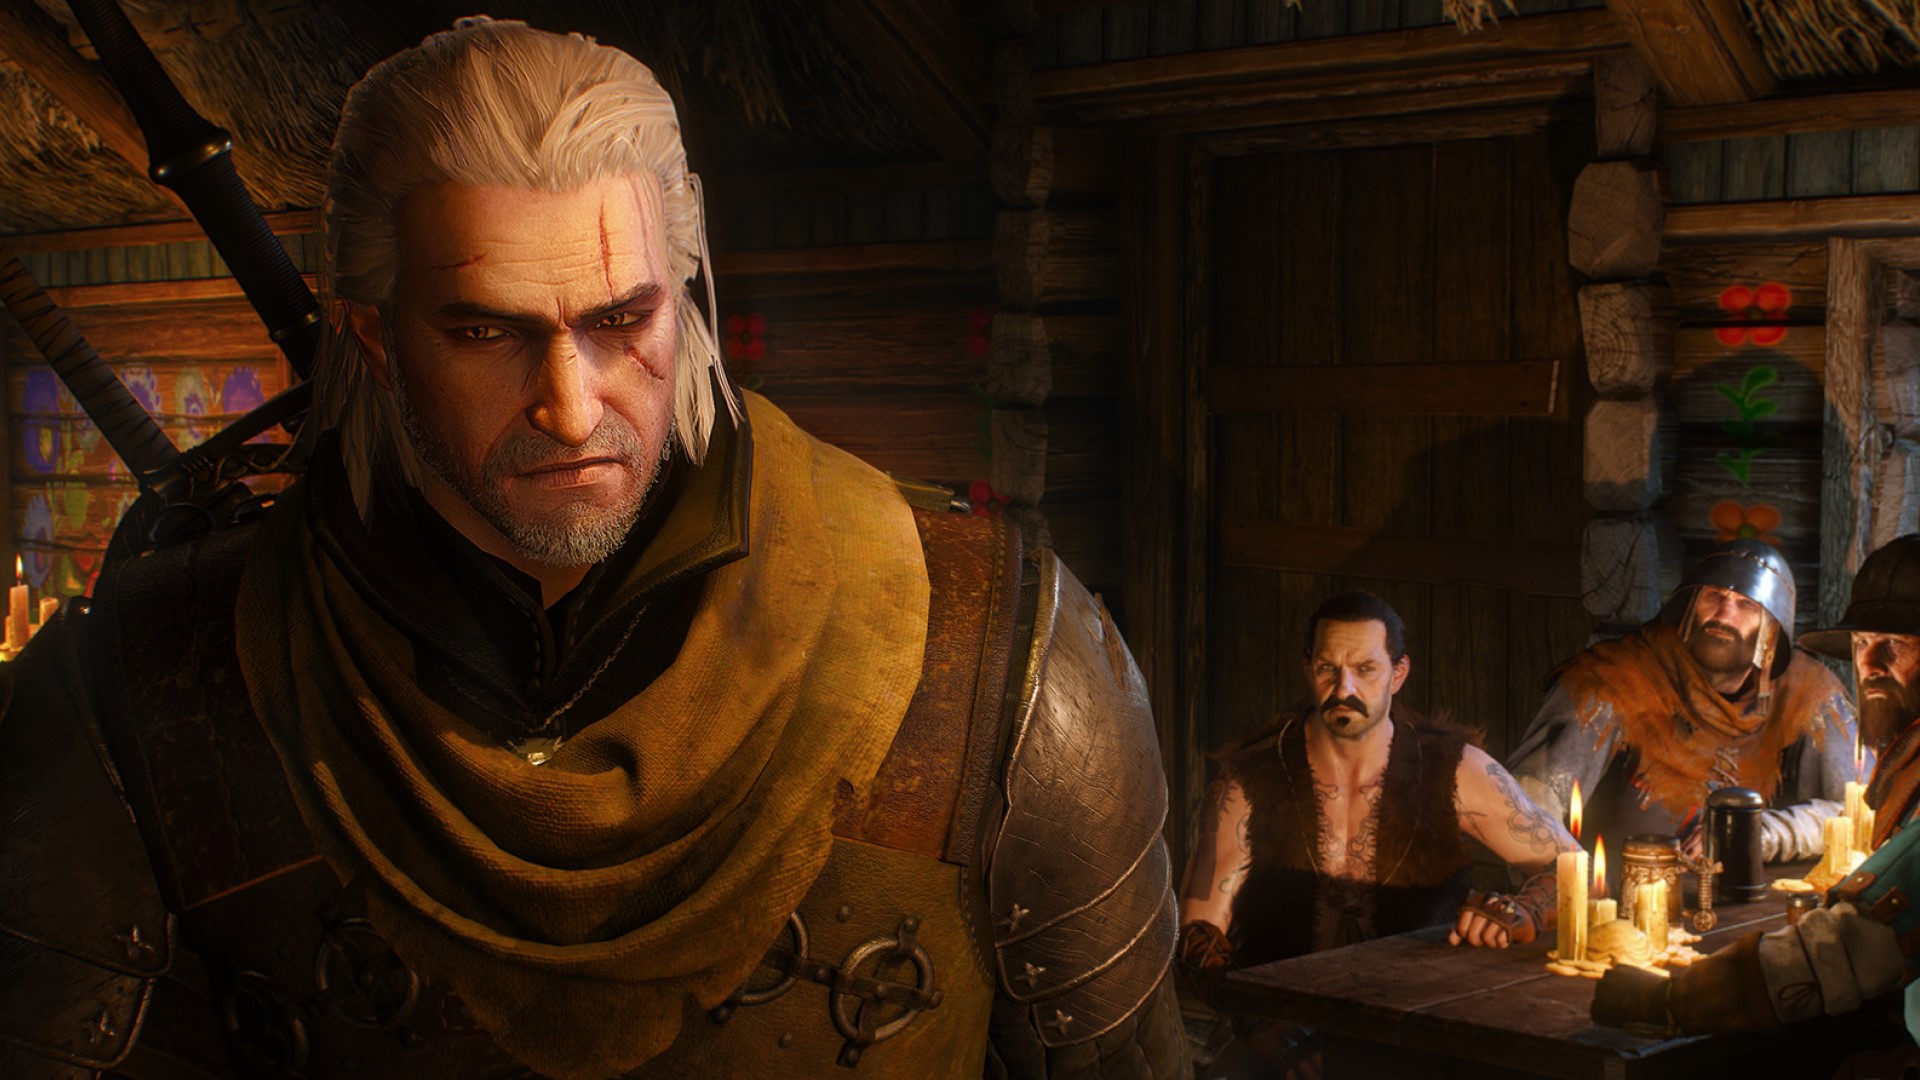 The Witcher 3 next gen upgrade is coming this year after all